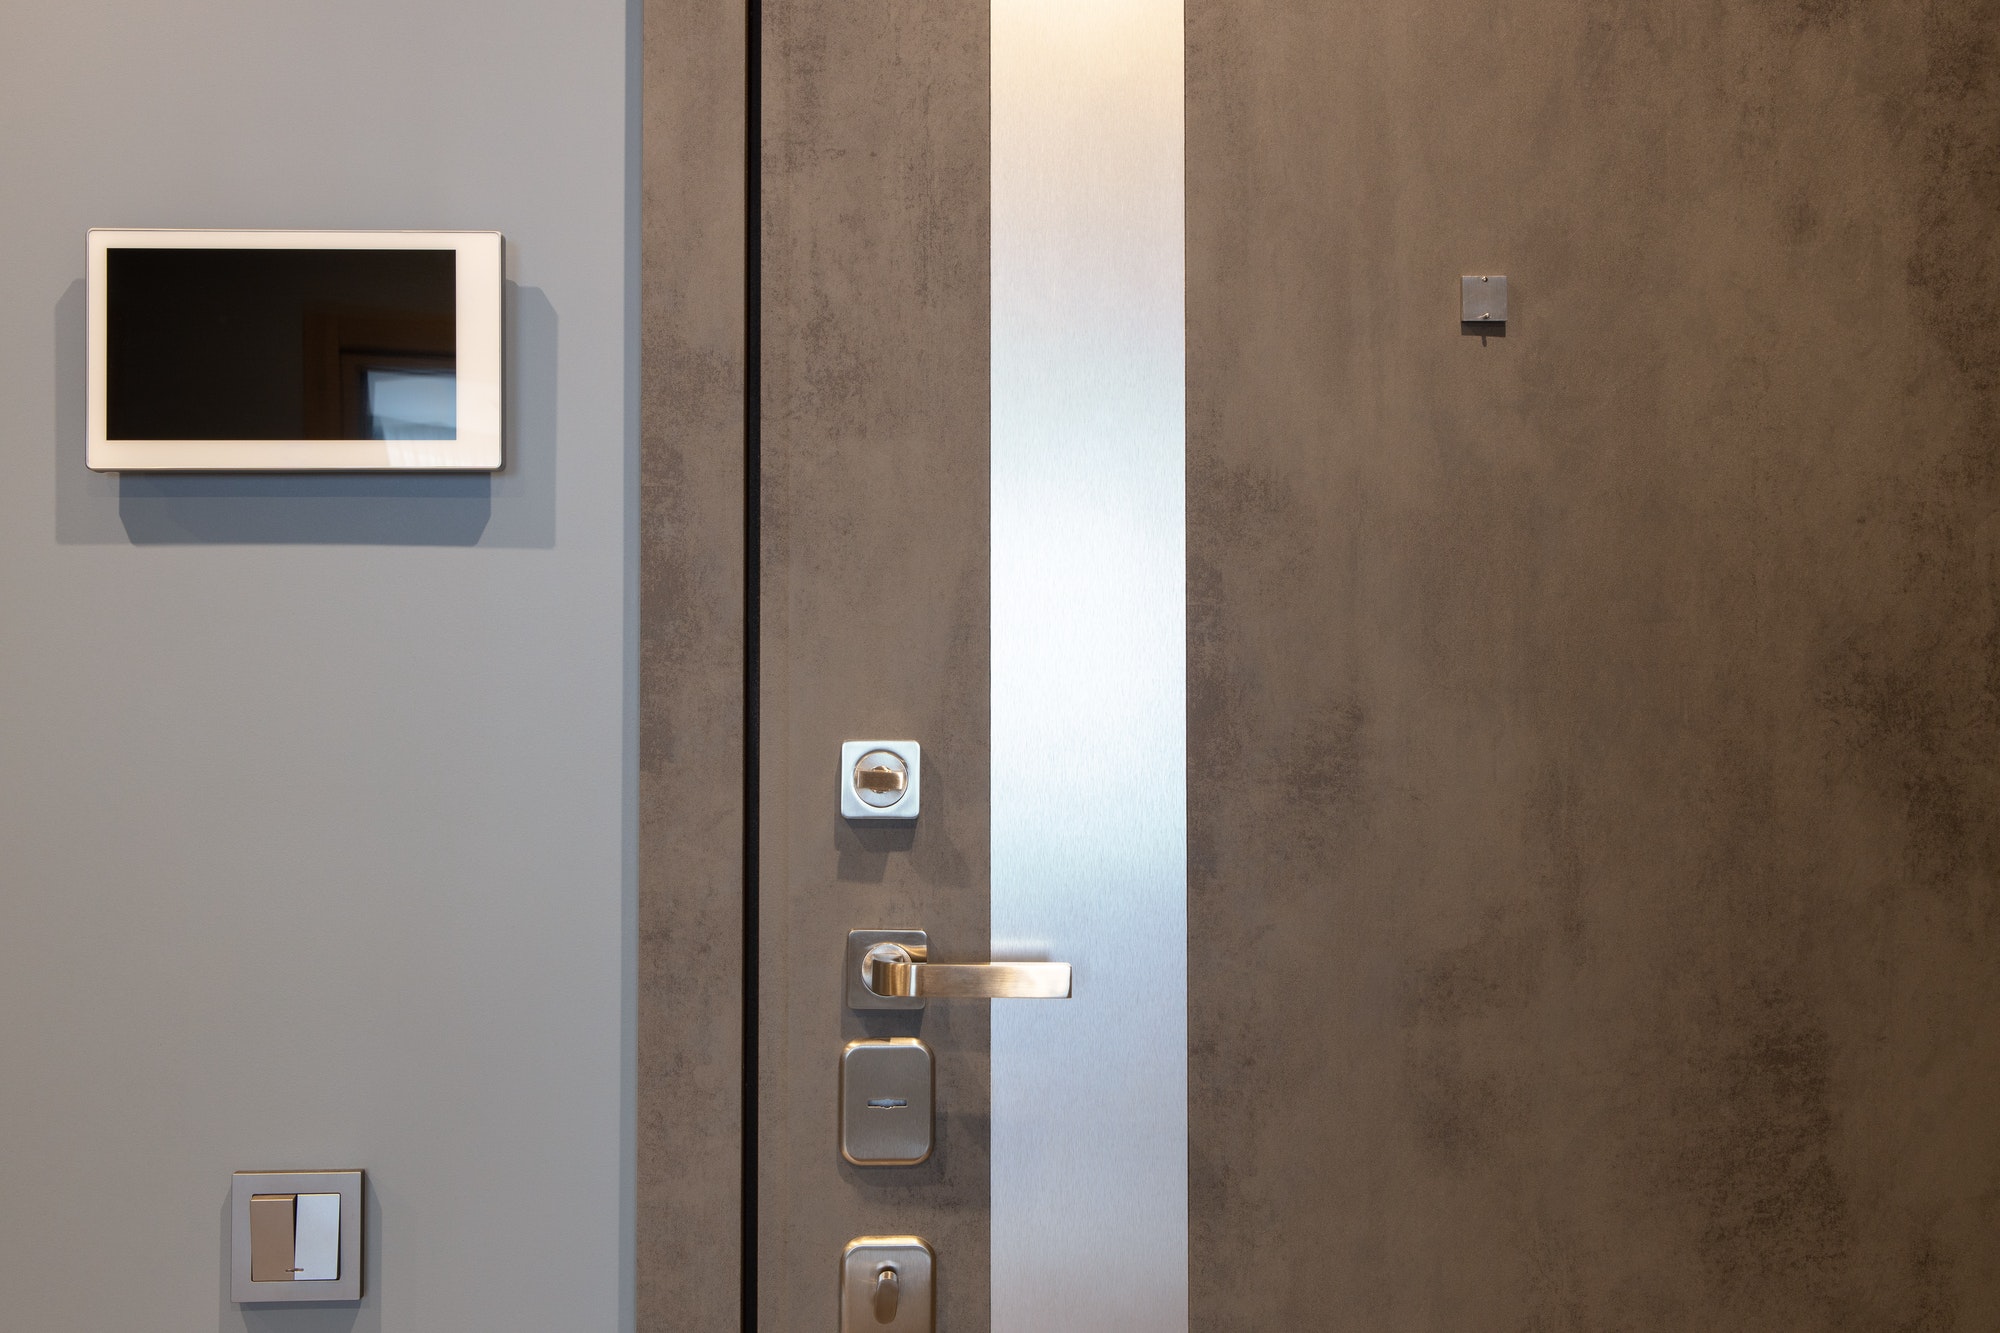 Shabby design entrance door in a modern apartment hallway, video intercom device on the wall. Neutra